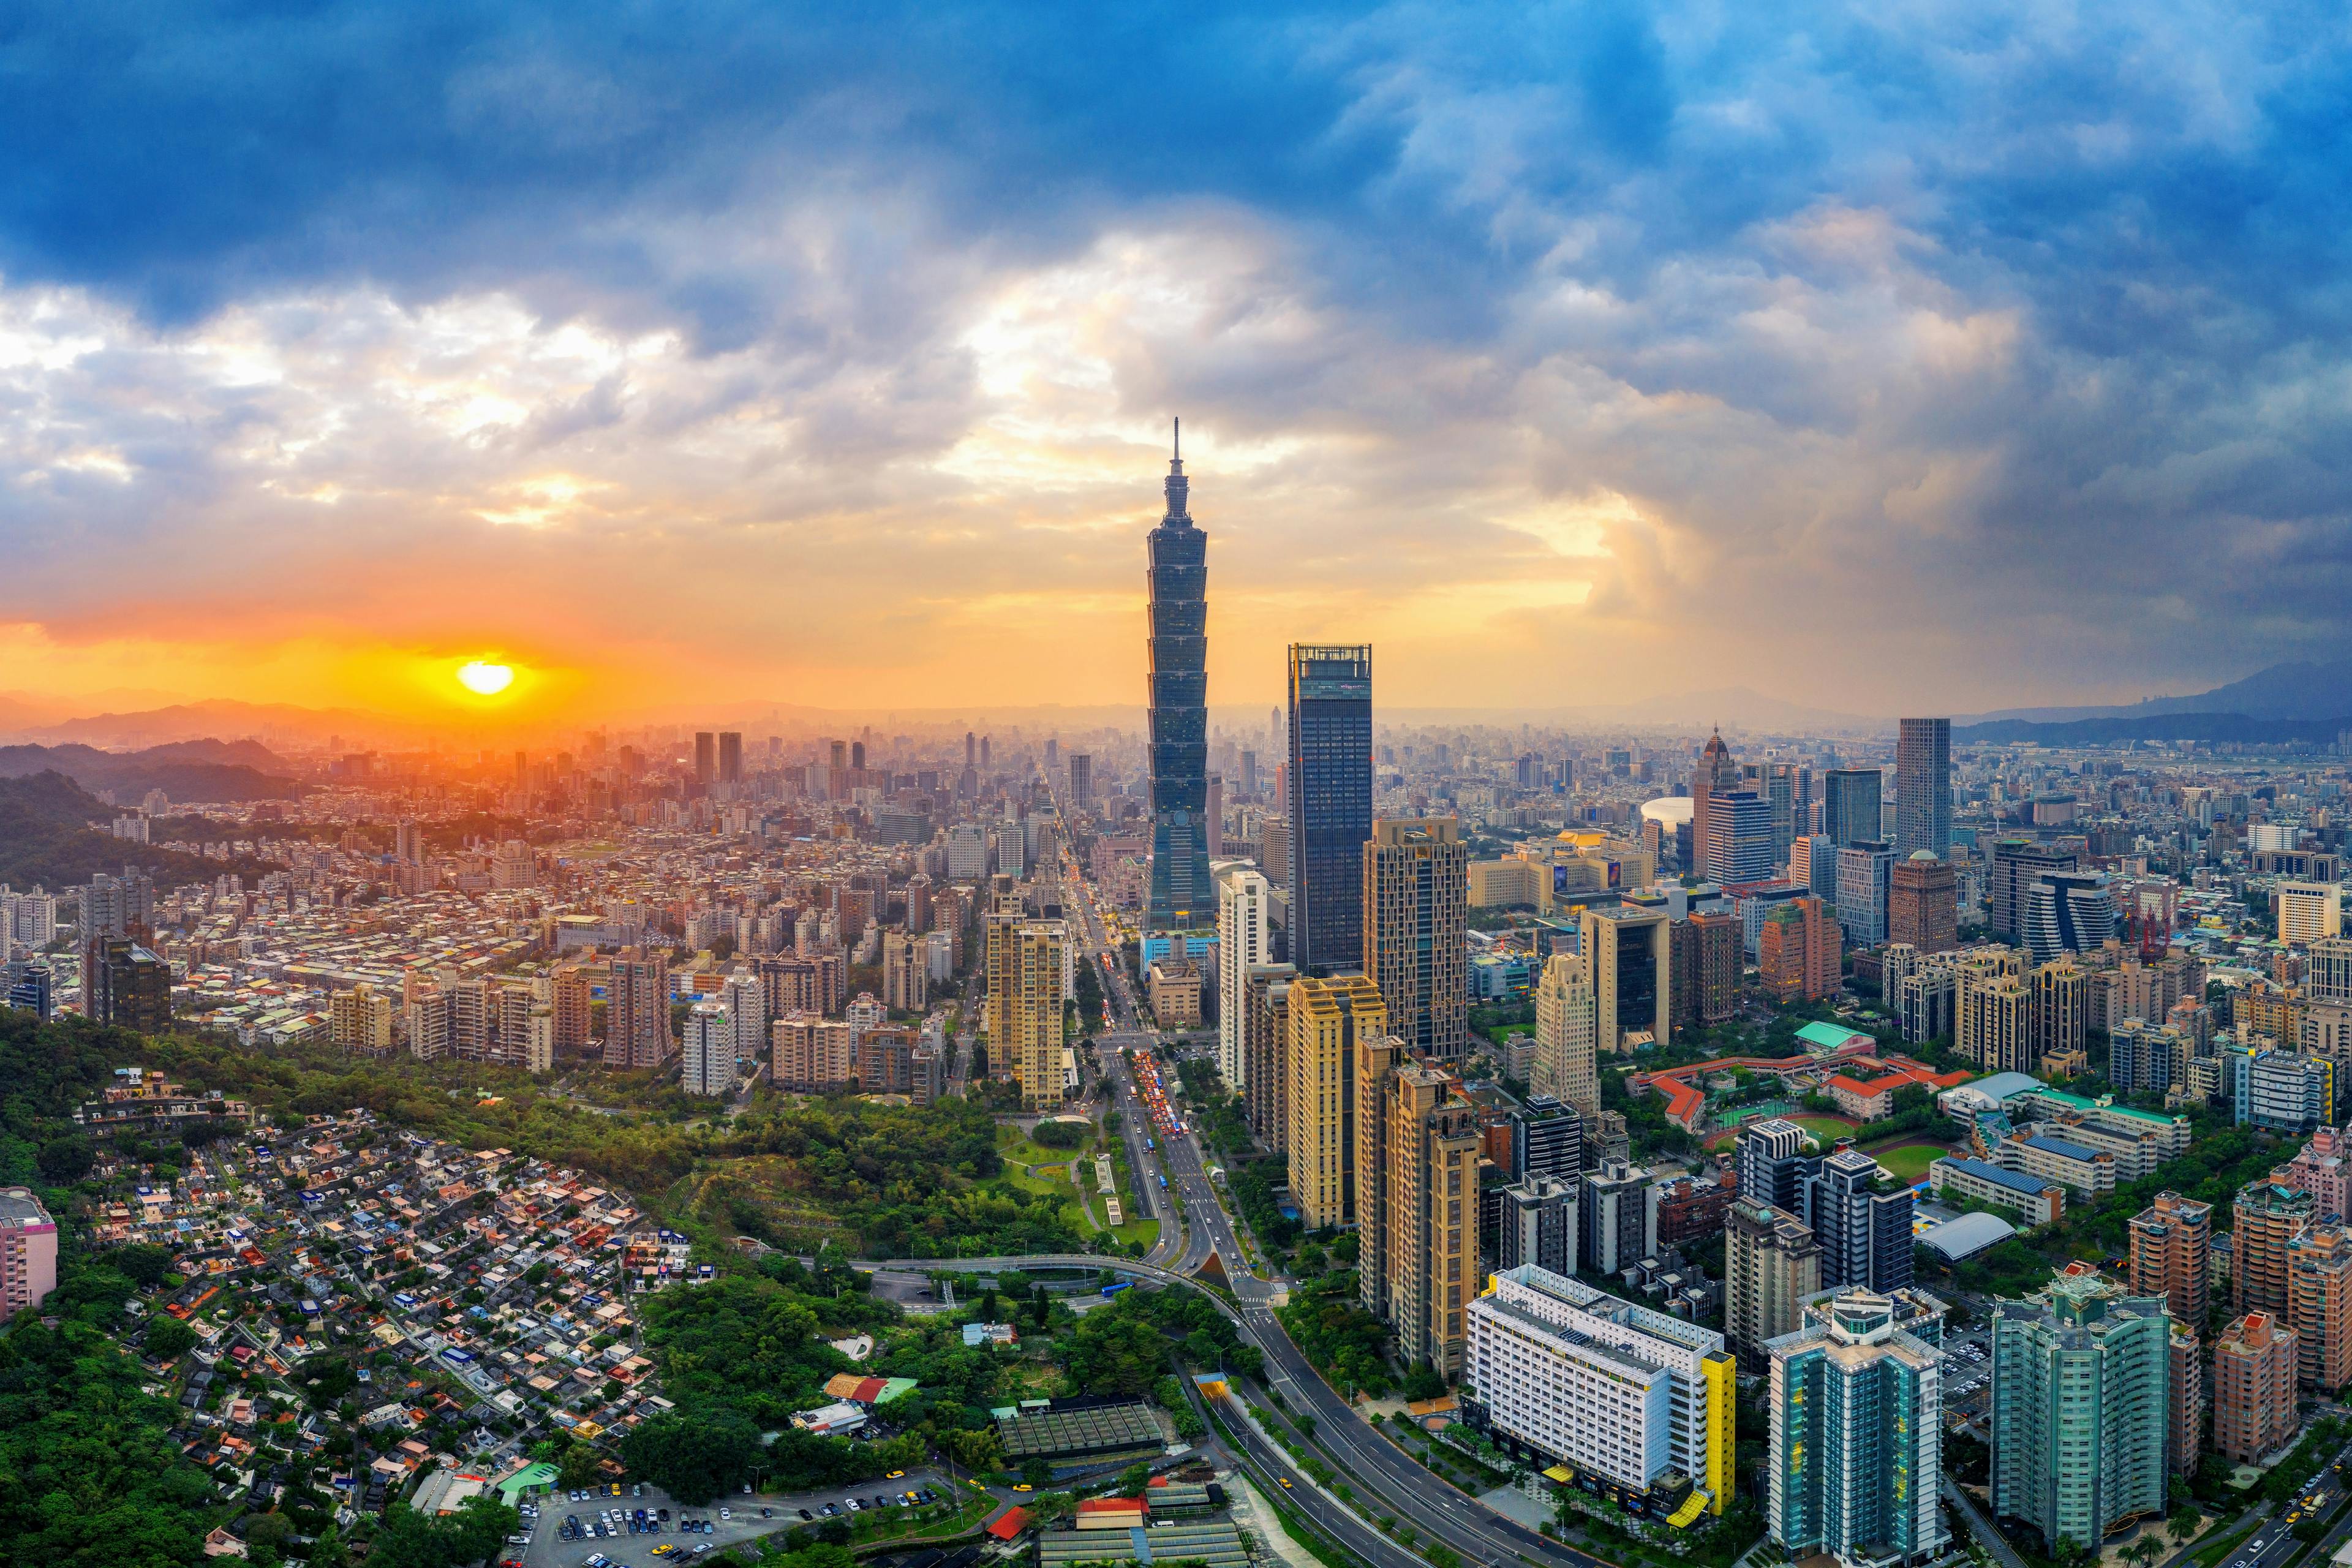 Aerial view of the Taiwan skyline at sunset